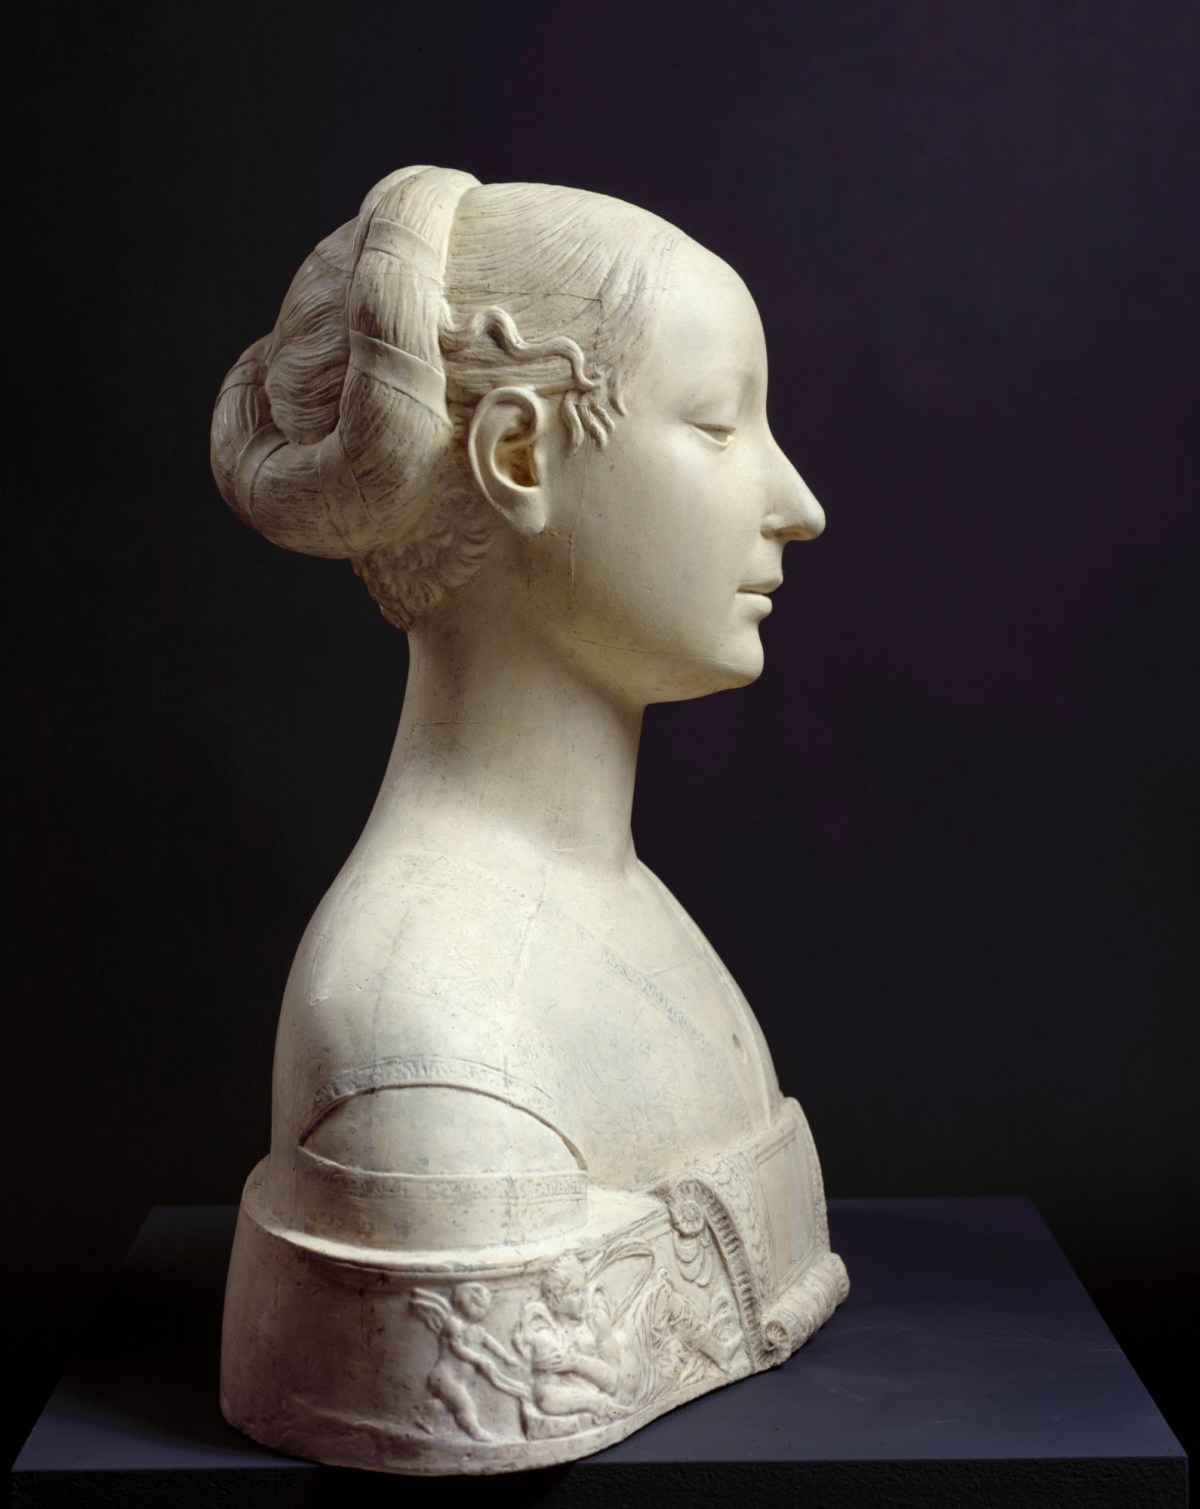 Bust of a woman, possibly Ippolita Maria Sforza